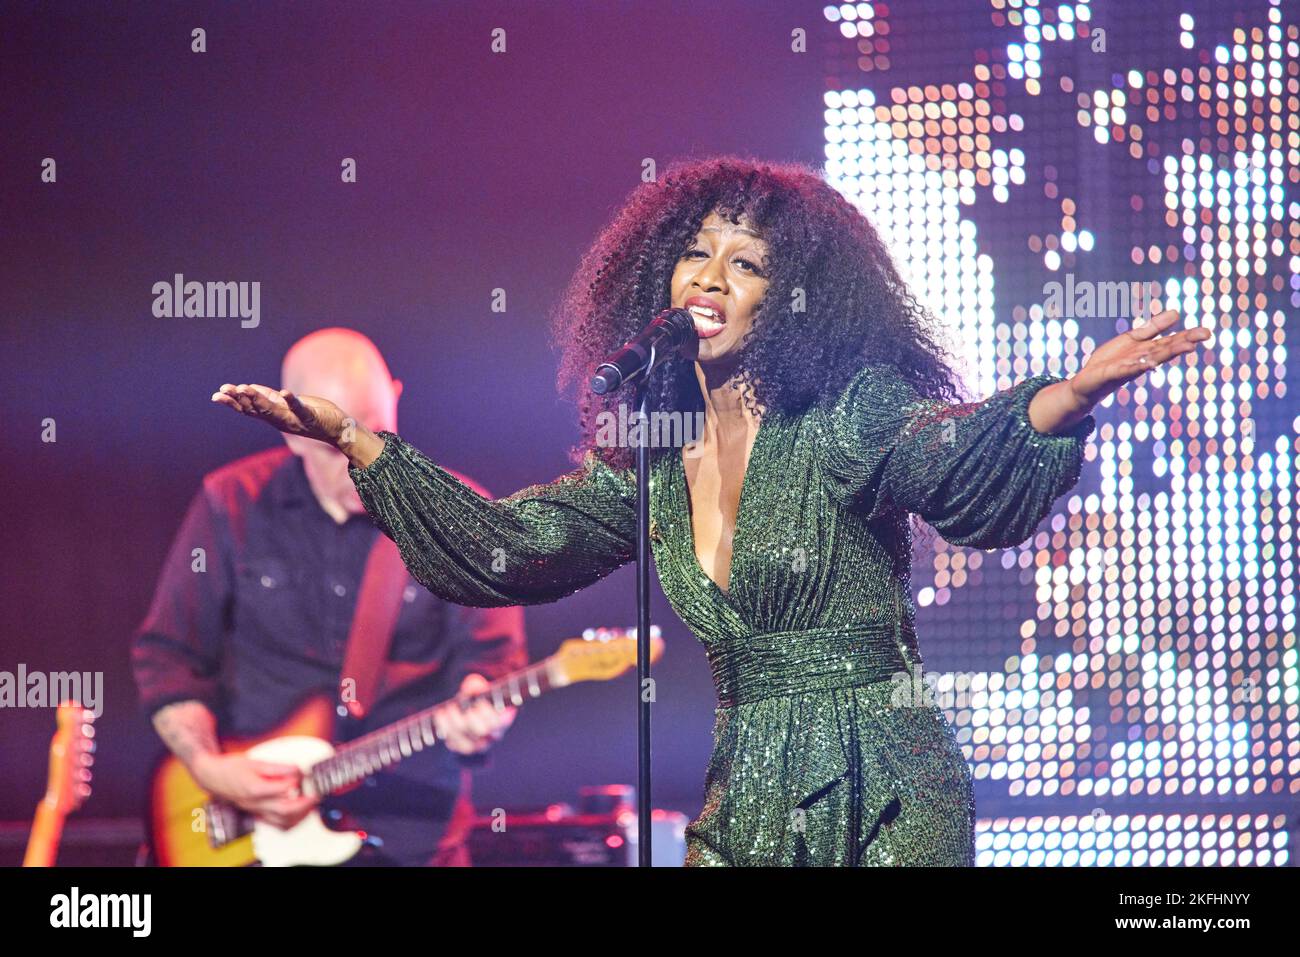 BEVERLEY KNIGHT sings onstage at a corporate event Stock Photo